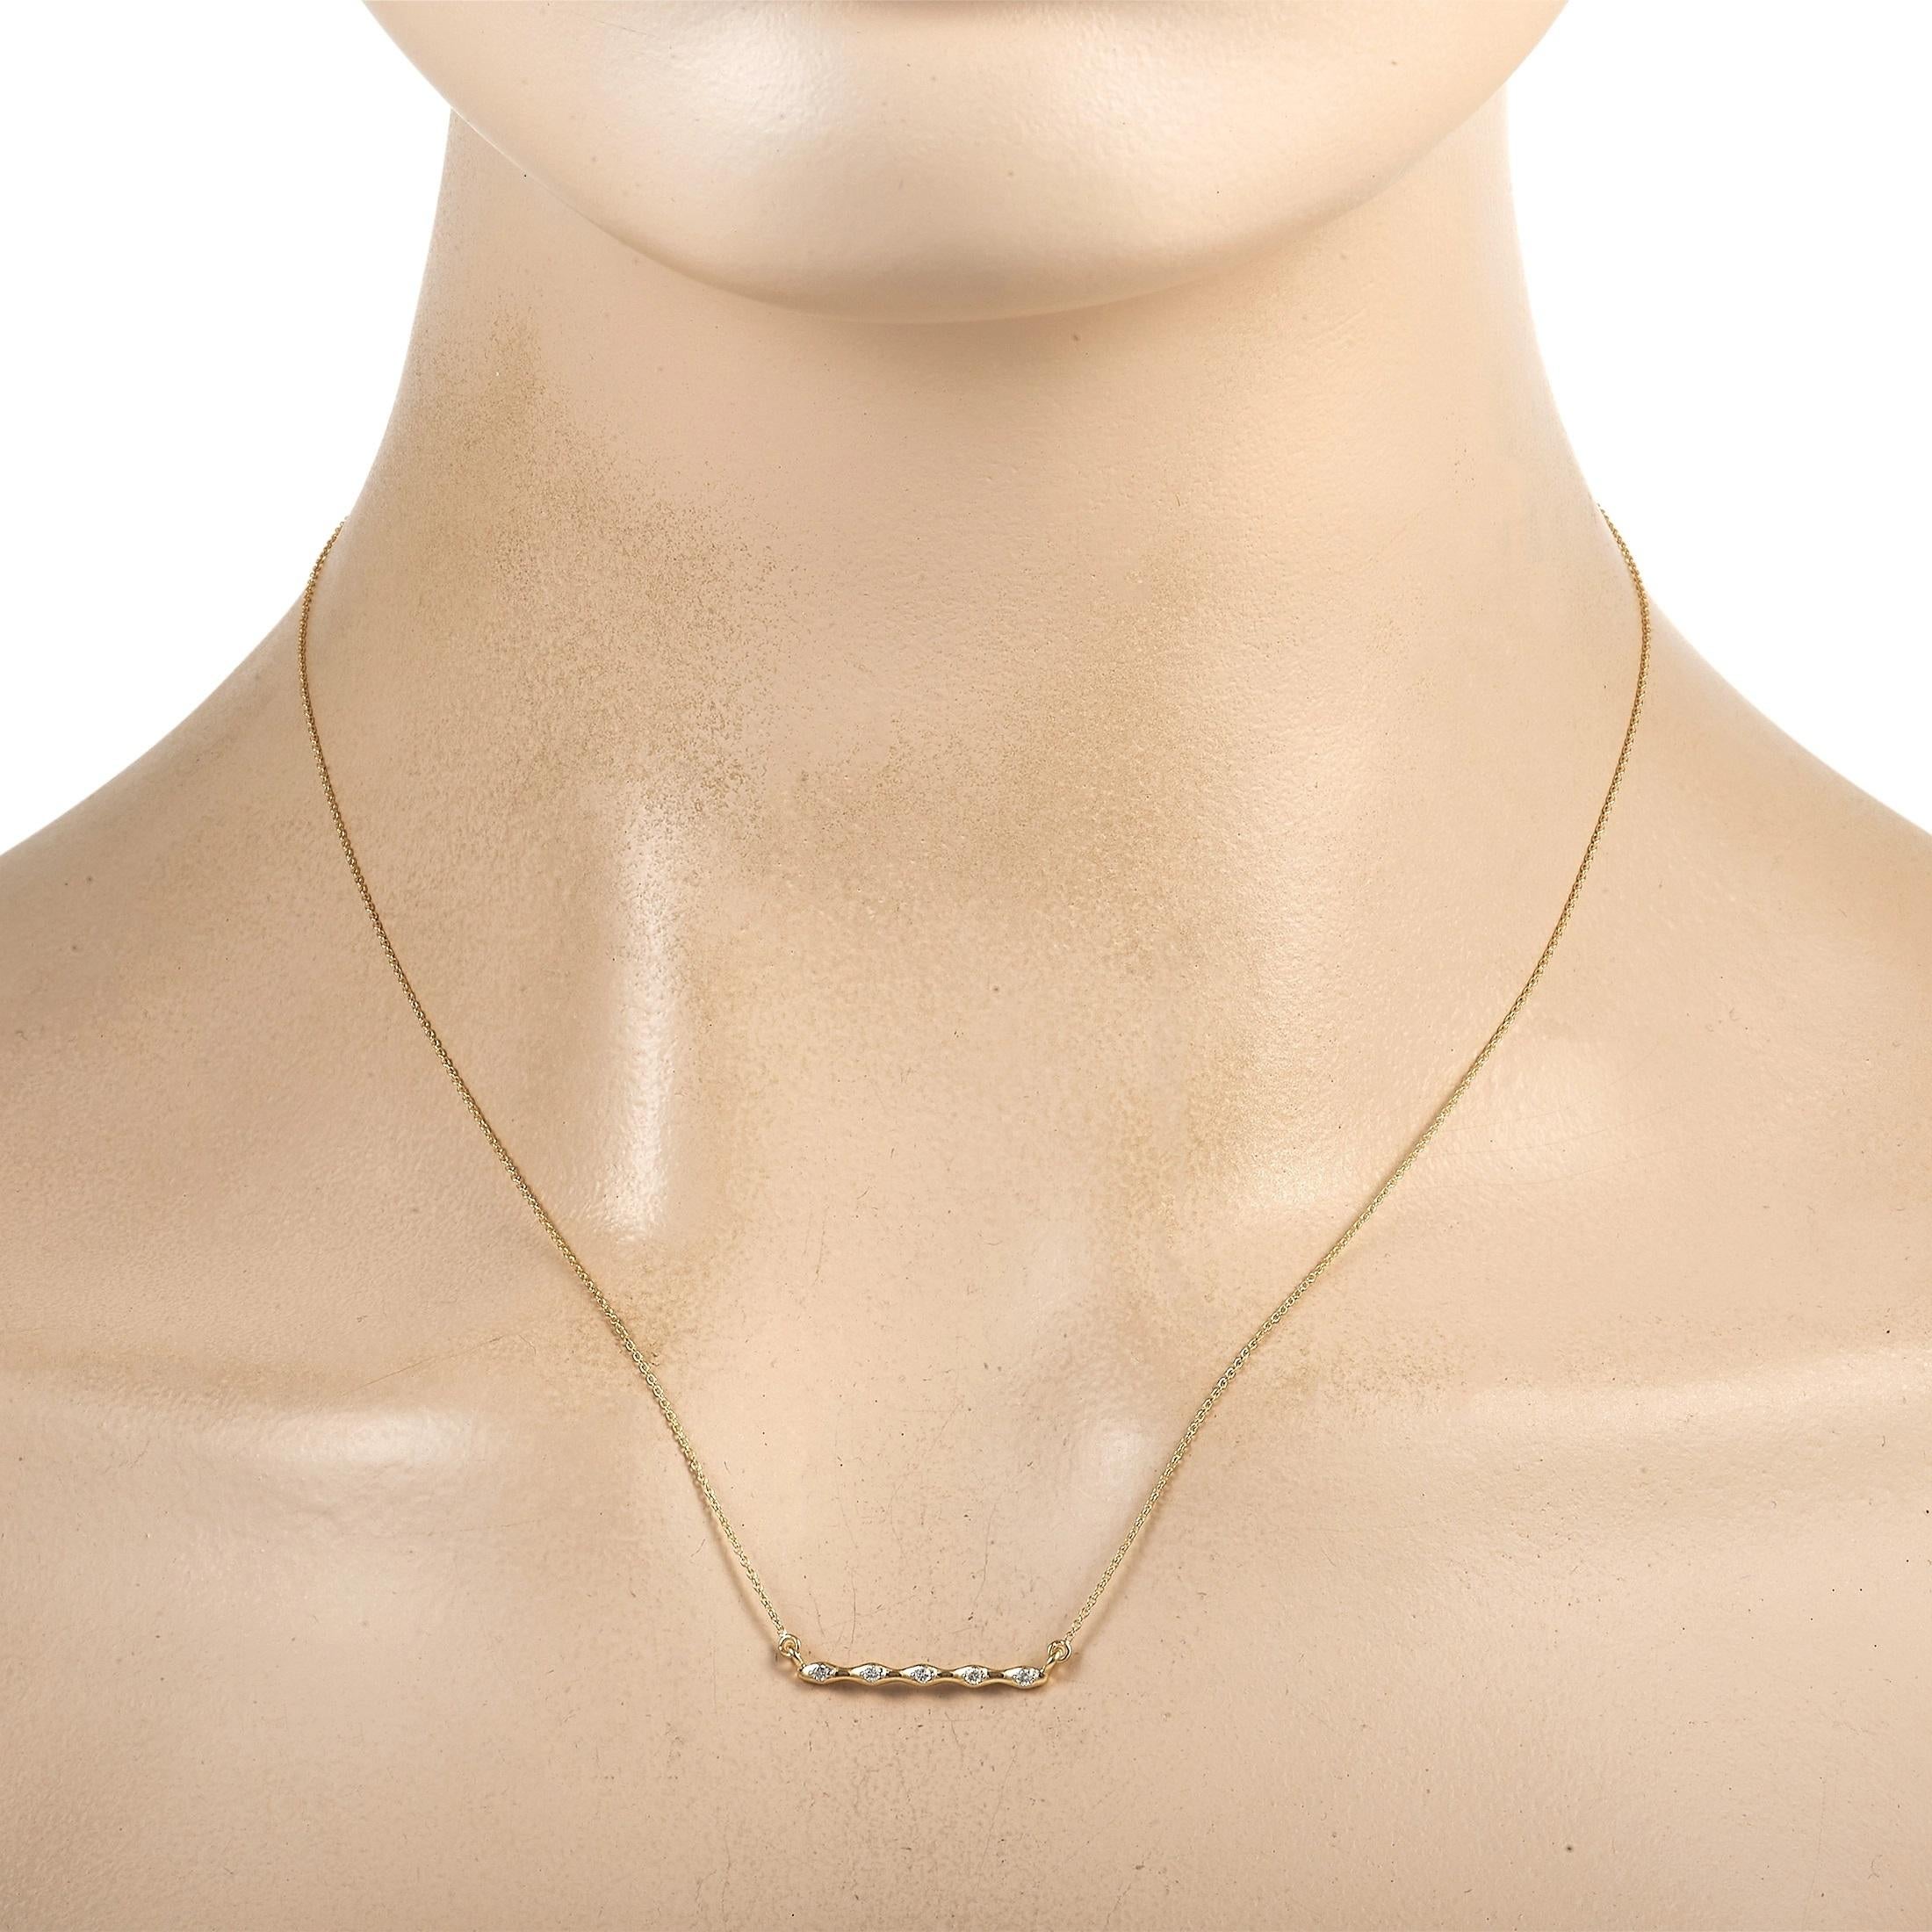 There’s something enchanting about this sleek, sophisticated necklace. Crafted from 14K Yellow Gold, the simple pendant measures 0.85” long, 0.07” wide, and is adorned with glittering diamonds totaling 0.06 carats. It’s suspended at the center of a